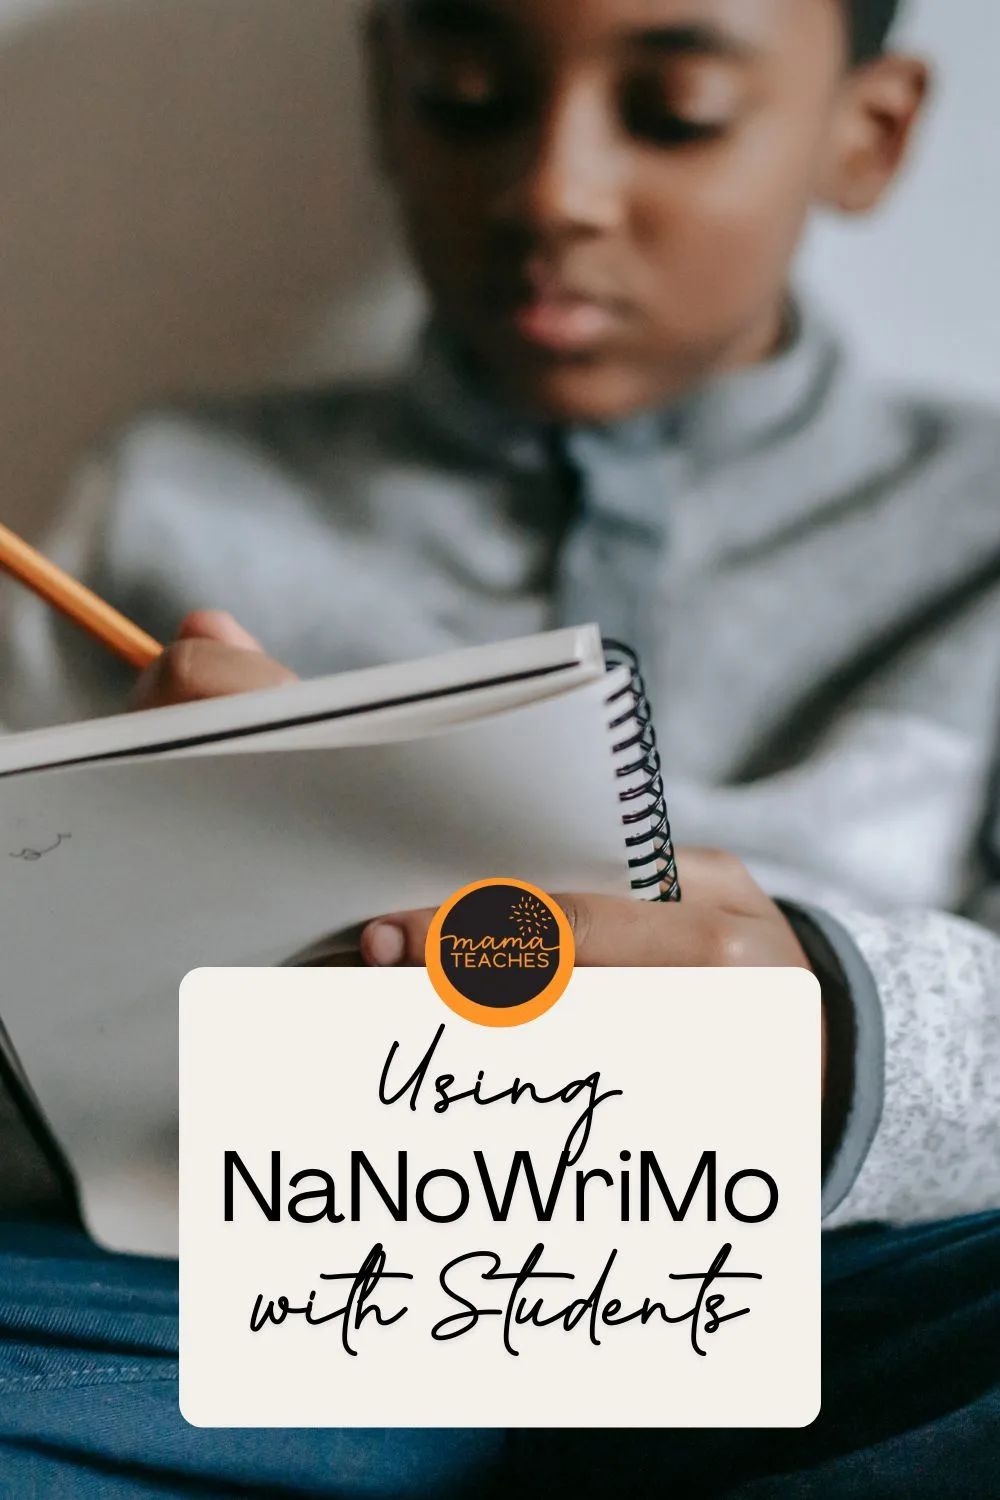 Using NaNoWriMo with Students